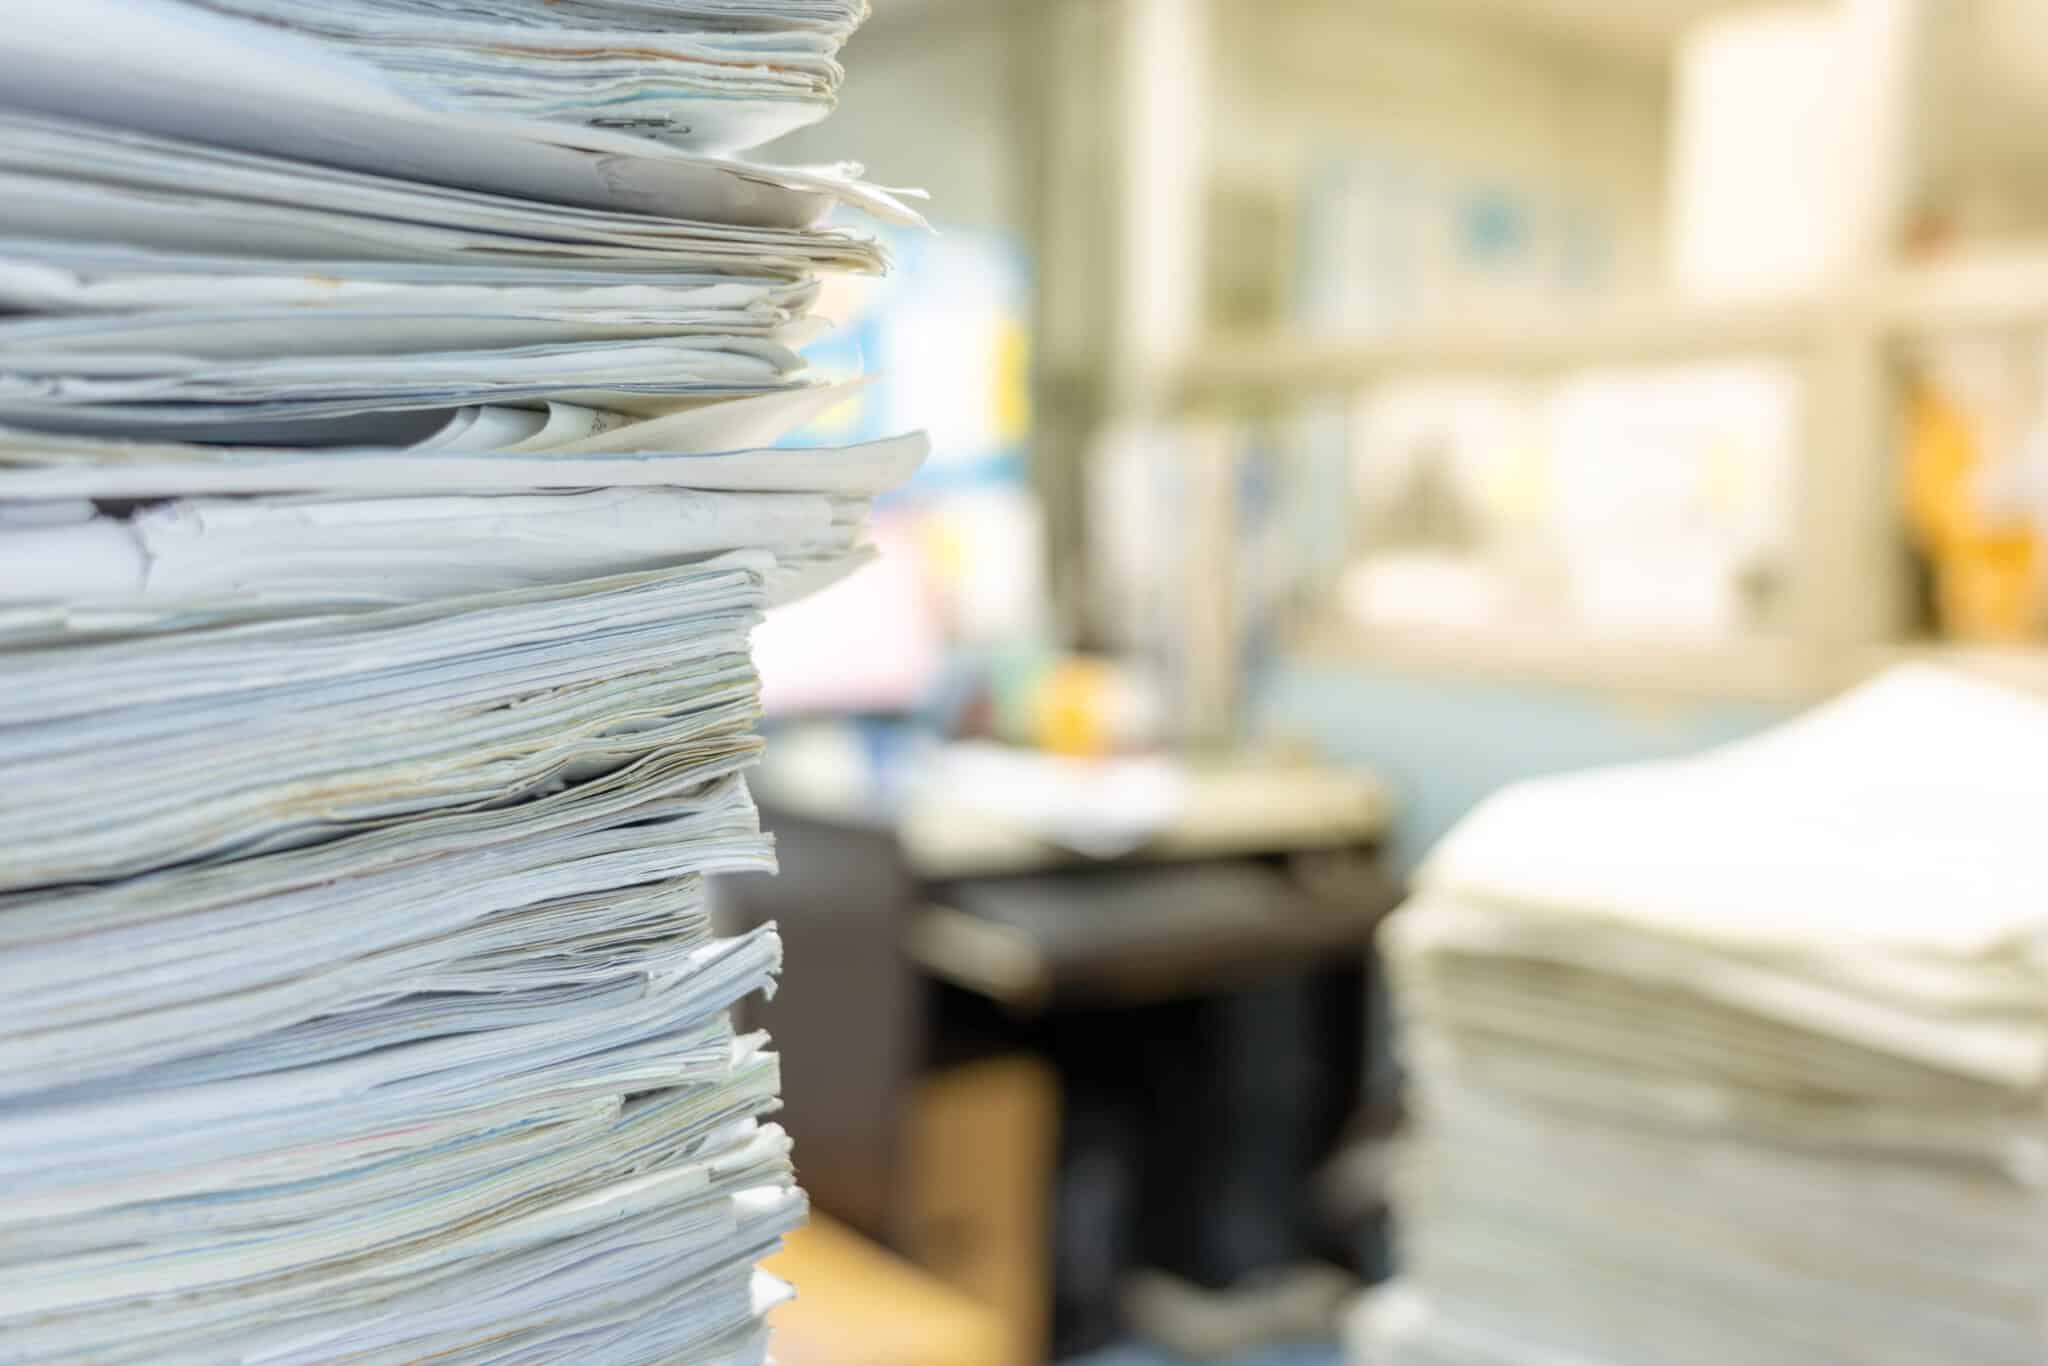 Why Does Paper Still Exists in the Business World?